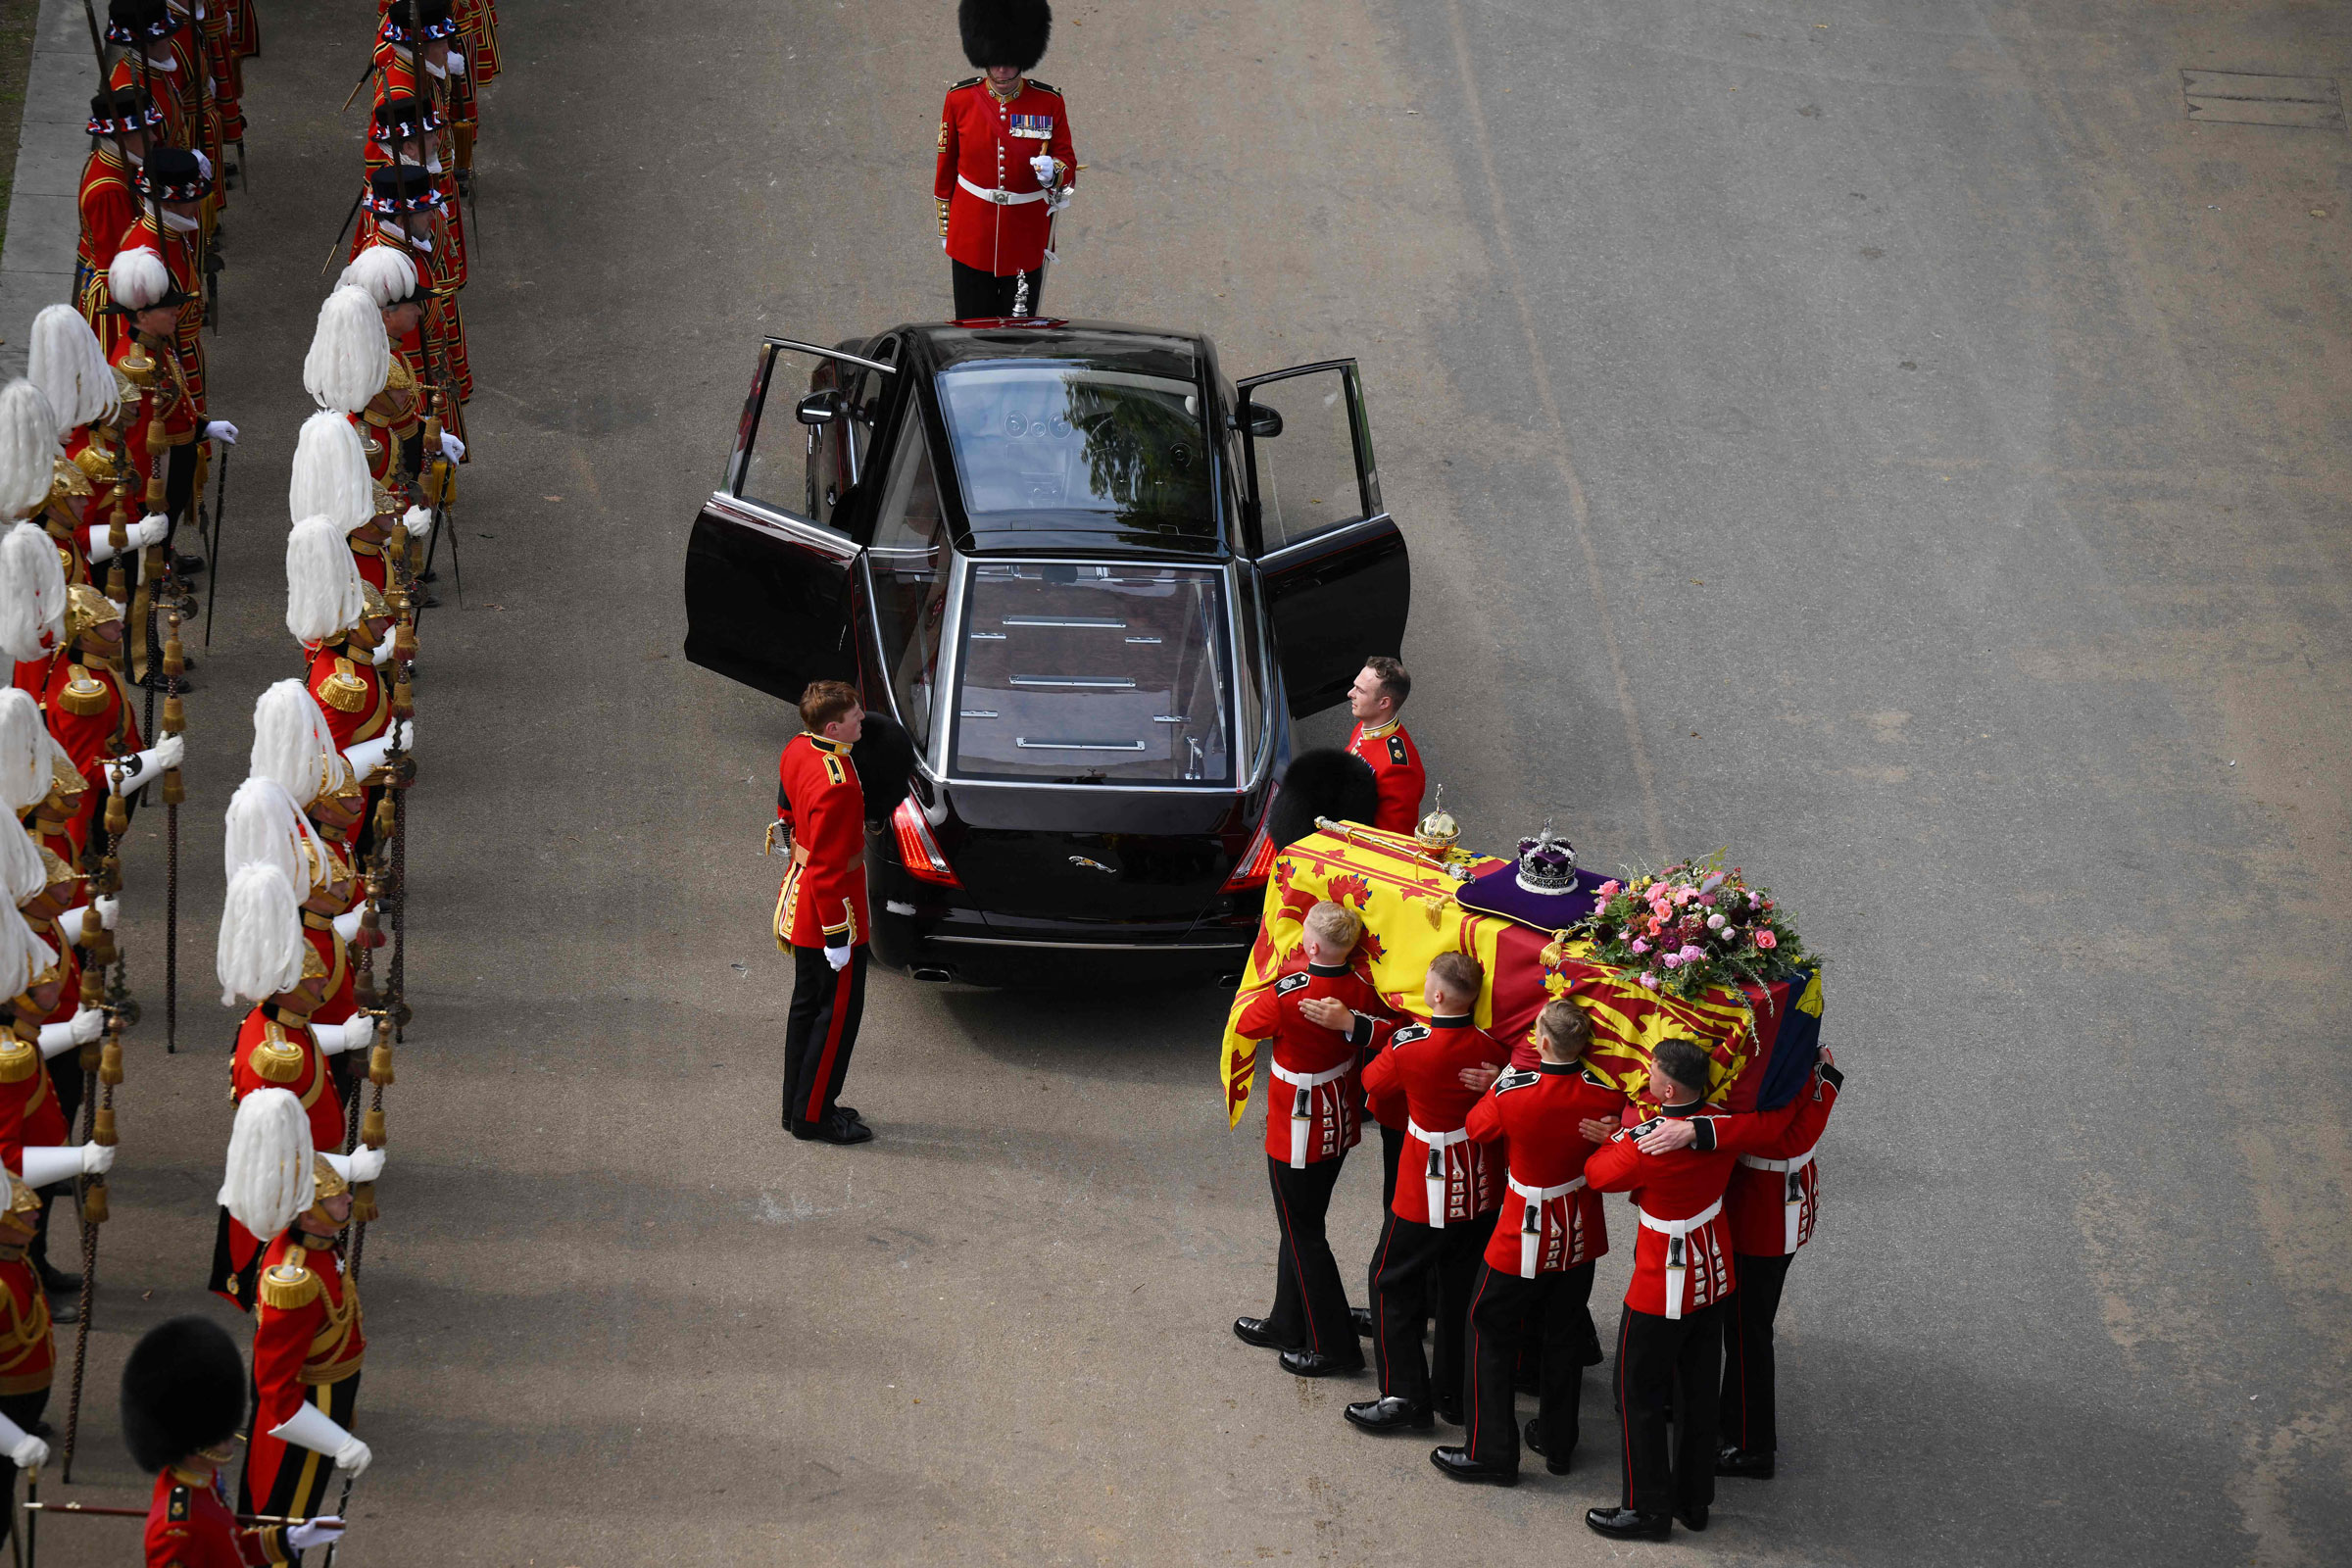 The pallbearer's party carries the coffin of Queen Elizabeth II, draped with the royal standard, into the state hearse at Wellington Arch, following the state funeral service for Britain's Queen Elizabeth II.  (Daniel Leal—AFP/Getty Images)